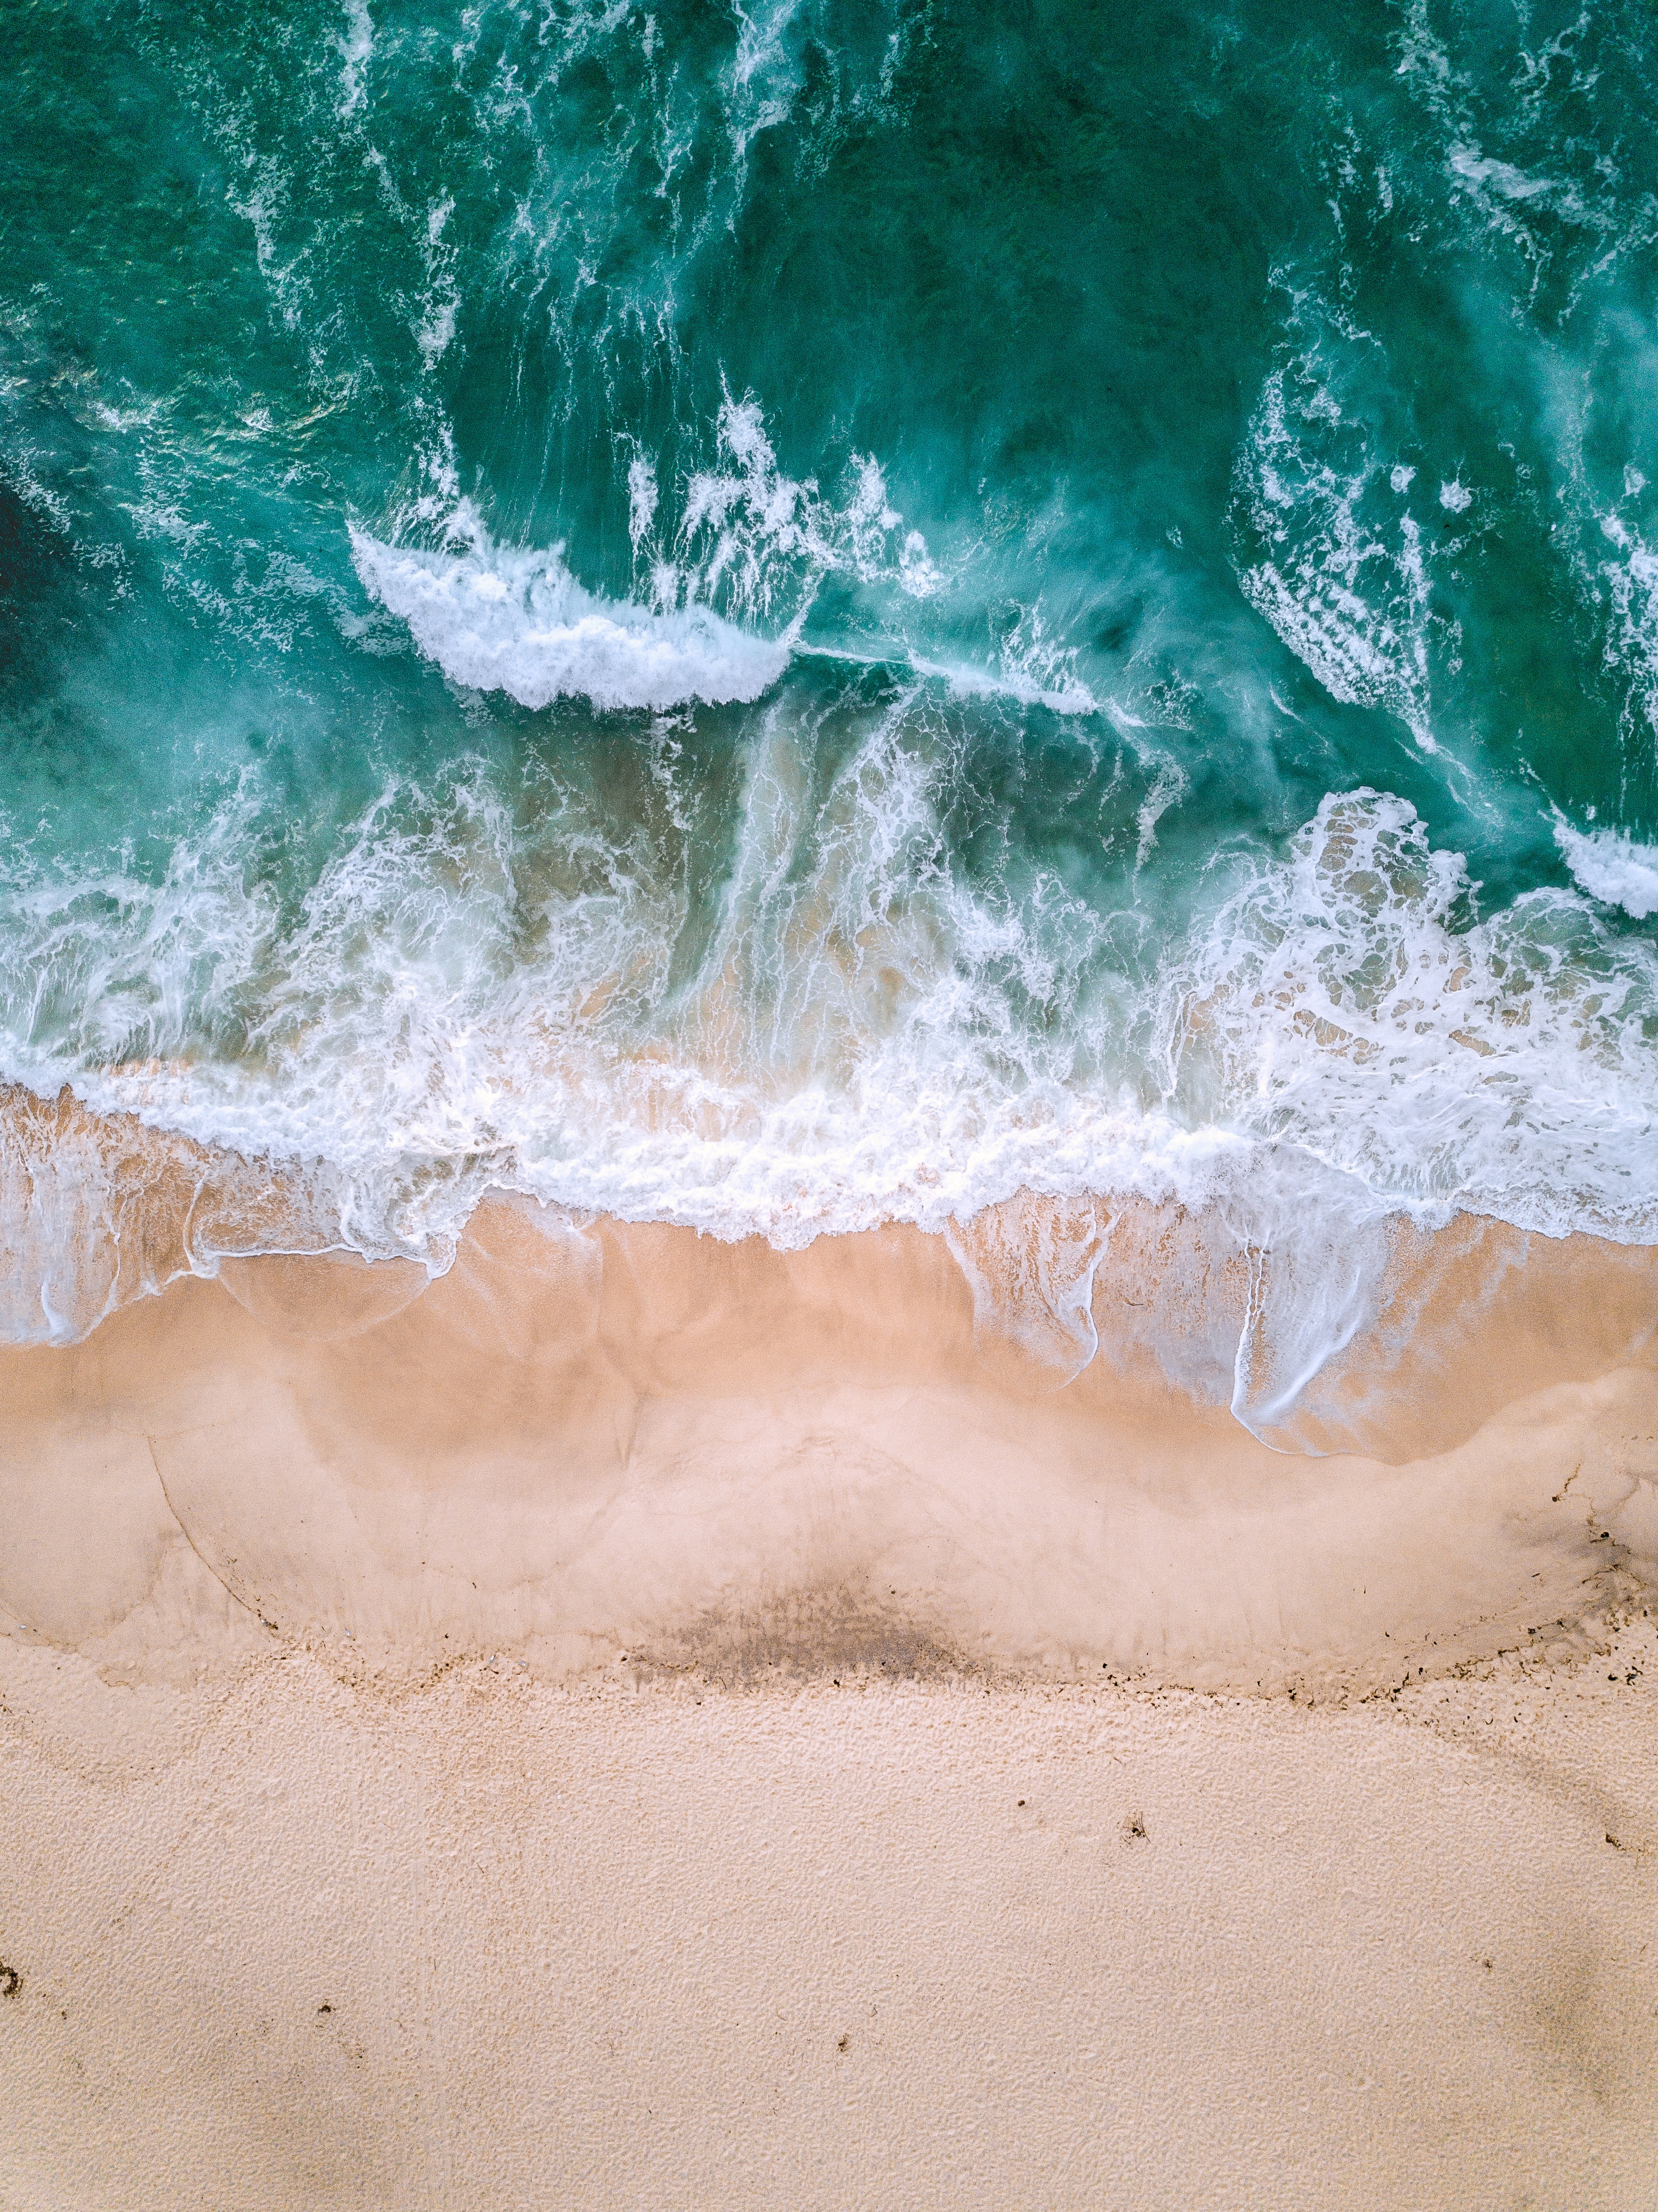 view from above, ocean, sand, nature, waves, foam, surf Full HD